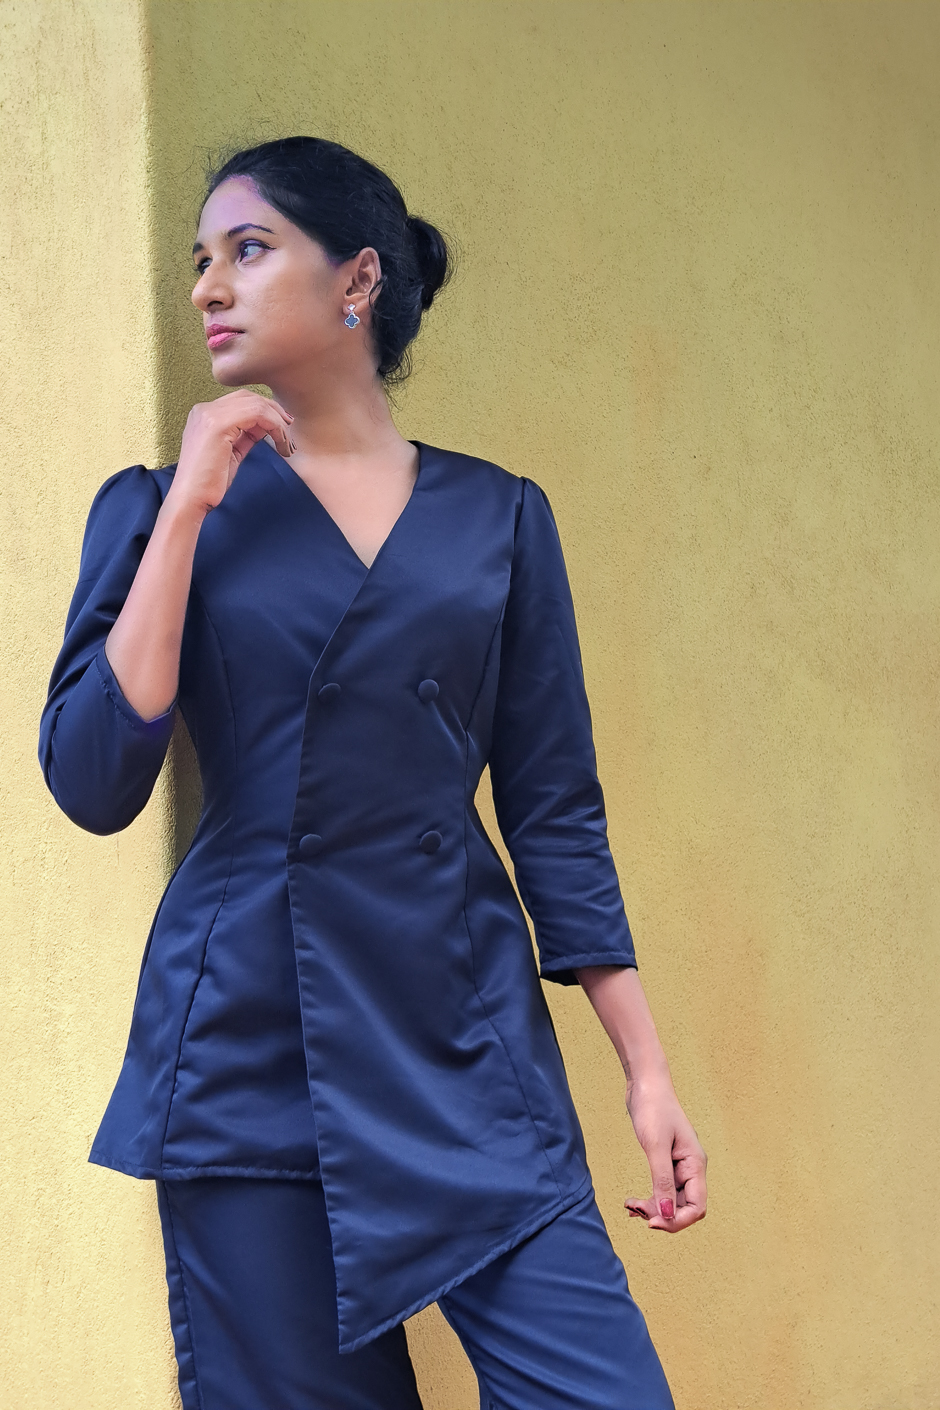 Kate - Double-Breasted Blazer from Navy Blue Polyester is designed V neck and with an Asymmetrical Hem